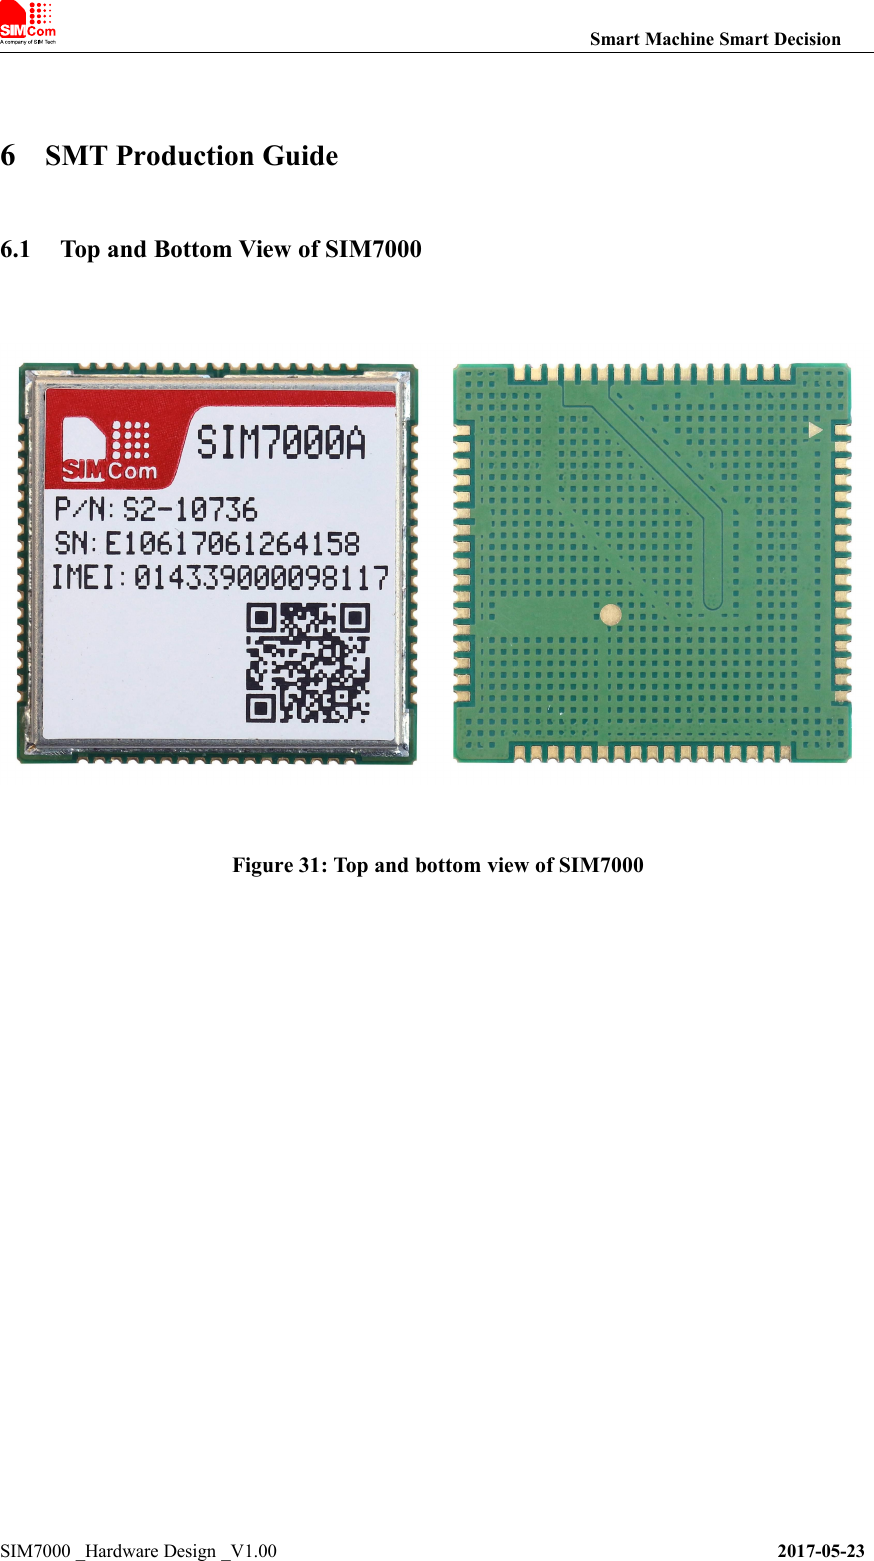 Smart Machine Smart DecisionSIM7000 _Hardware Design _V1.00 2017-05-236SMT Production Guide6.1 Top and Bottom View of SIM7000Figure 31: Top and bottom view of SIM7000